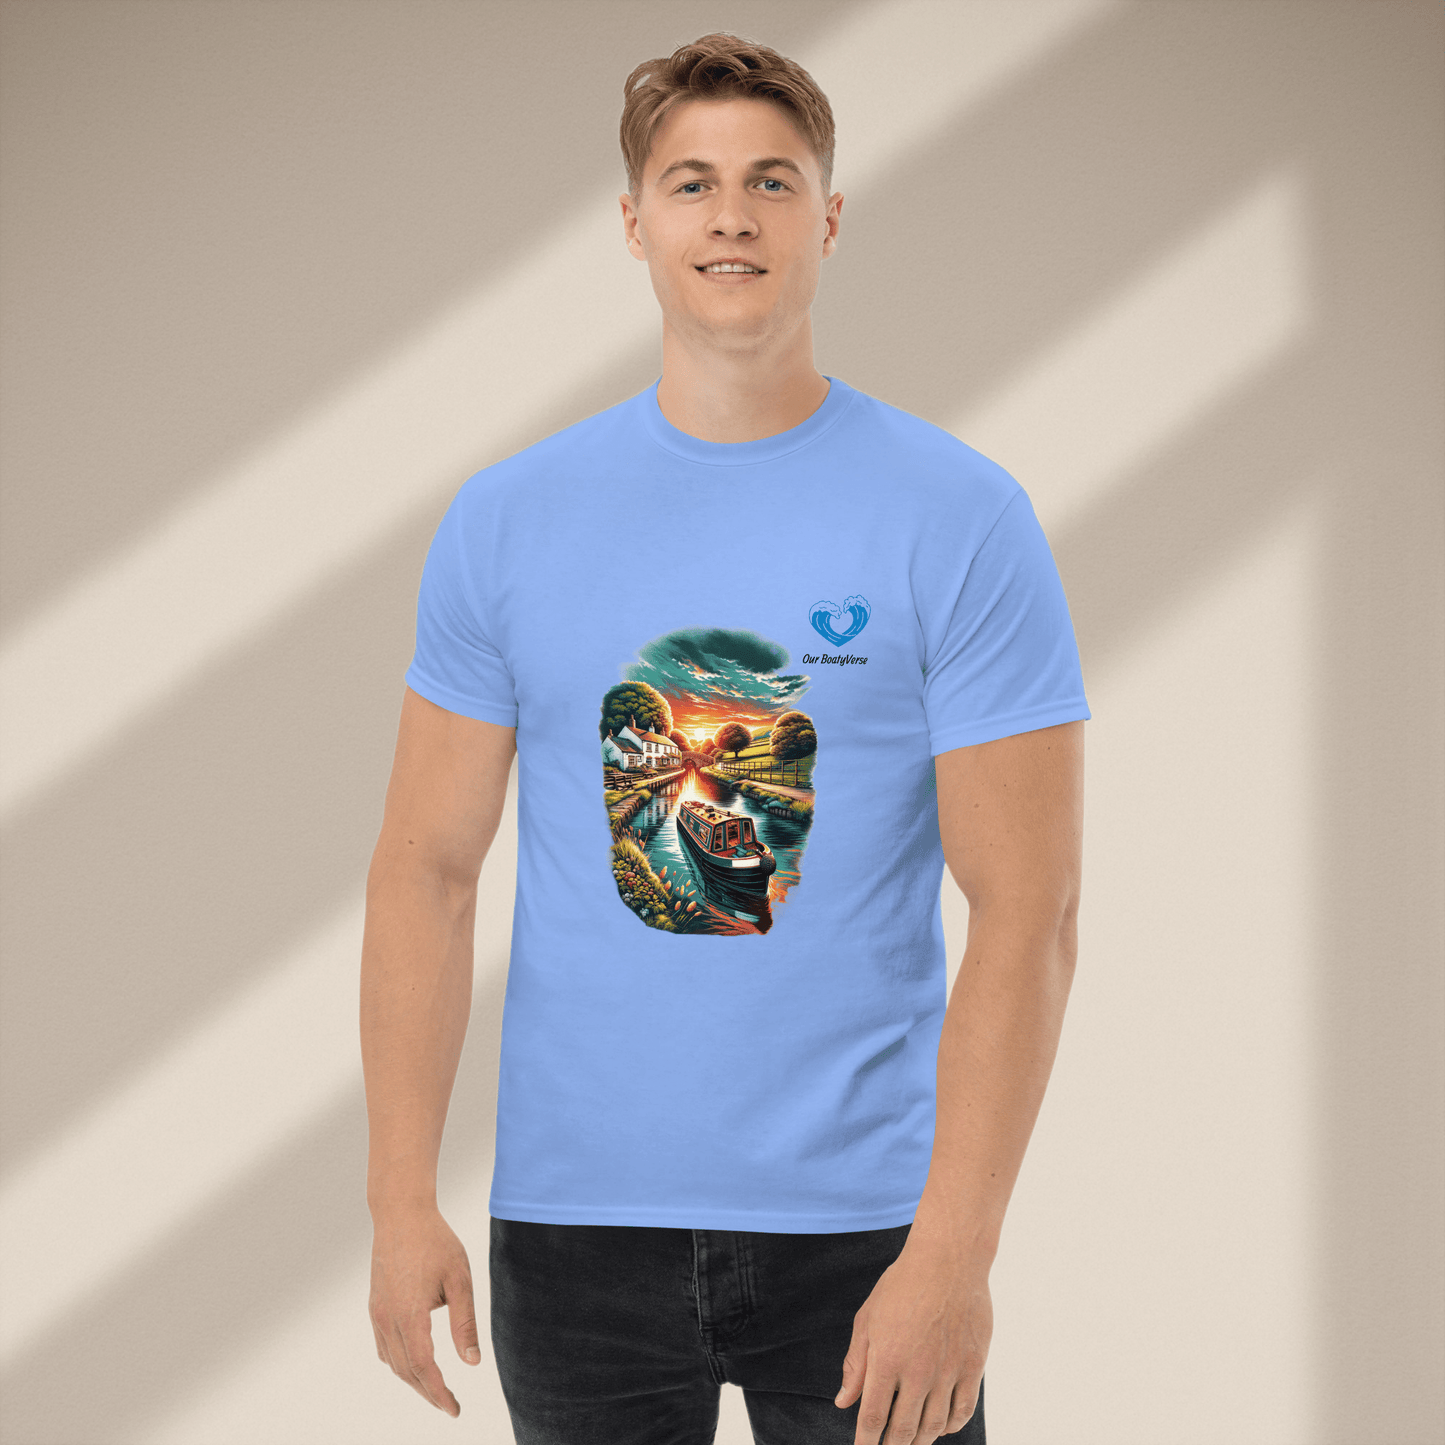 Narrowboat dreams, Men's T-Shirt by Our BoatyVerse